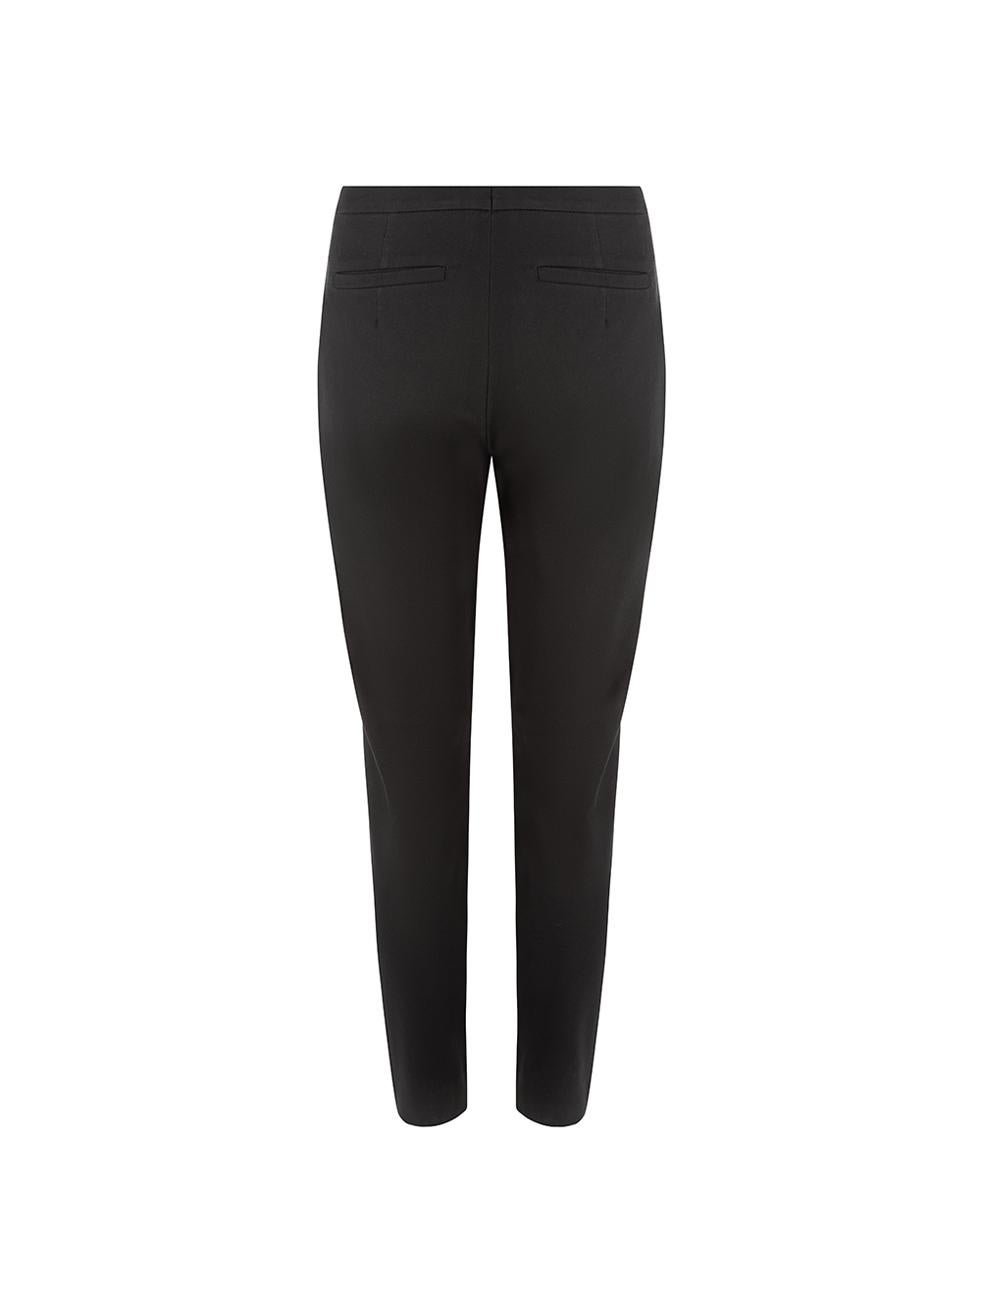 Fabiana Filippi Black Low Rise Straight Leg Trousers Size M In Good Condition For Sale In London, GB